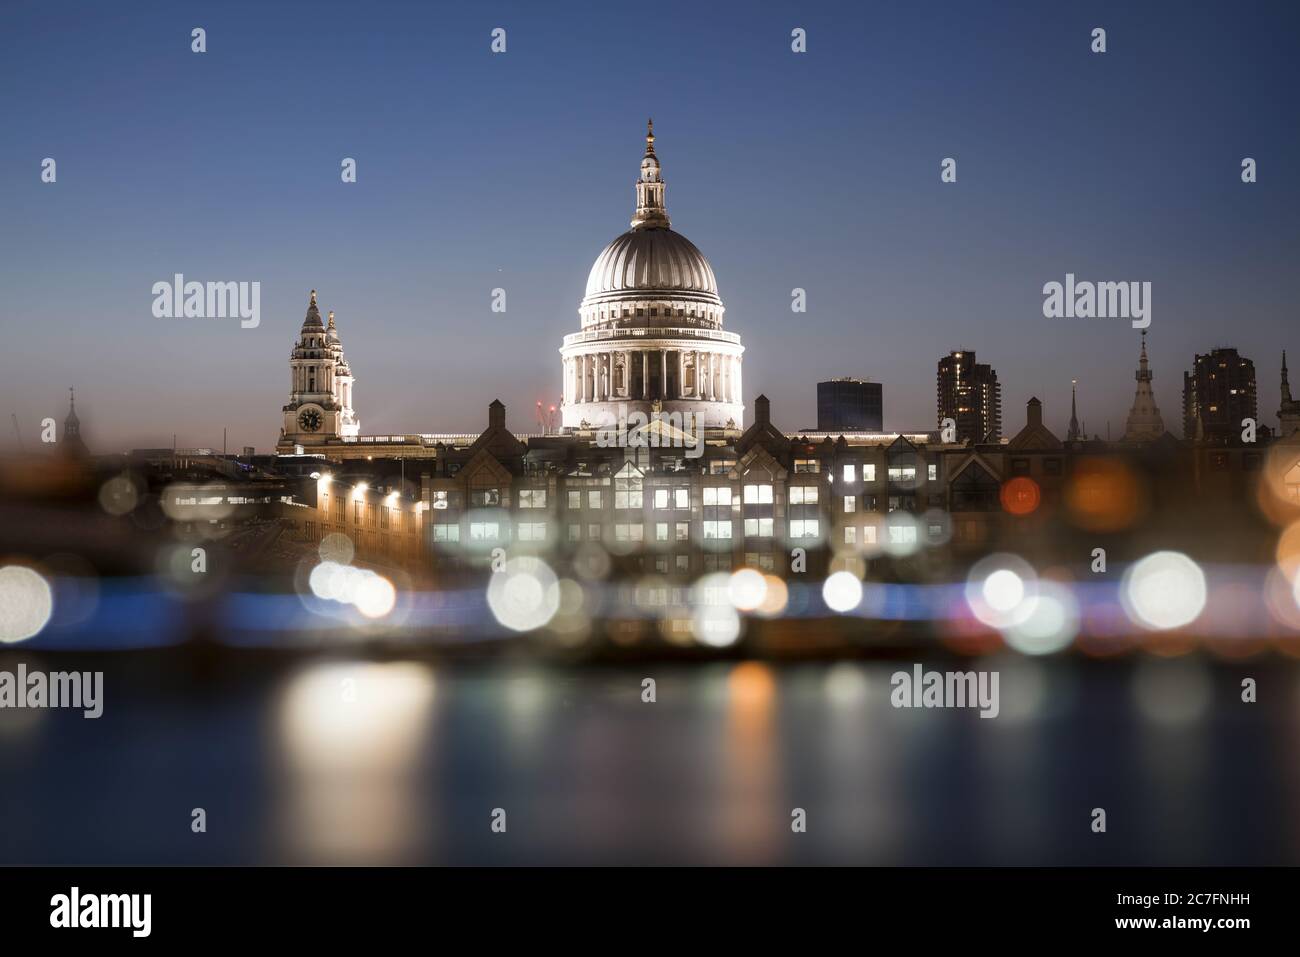 Beautiful view of the St. Paul's Cathedral captured in London, UK Stock Photo